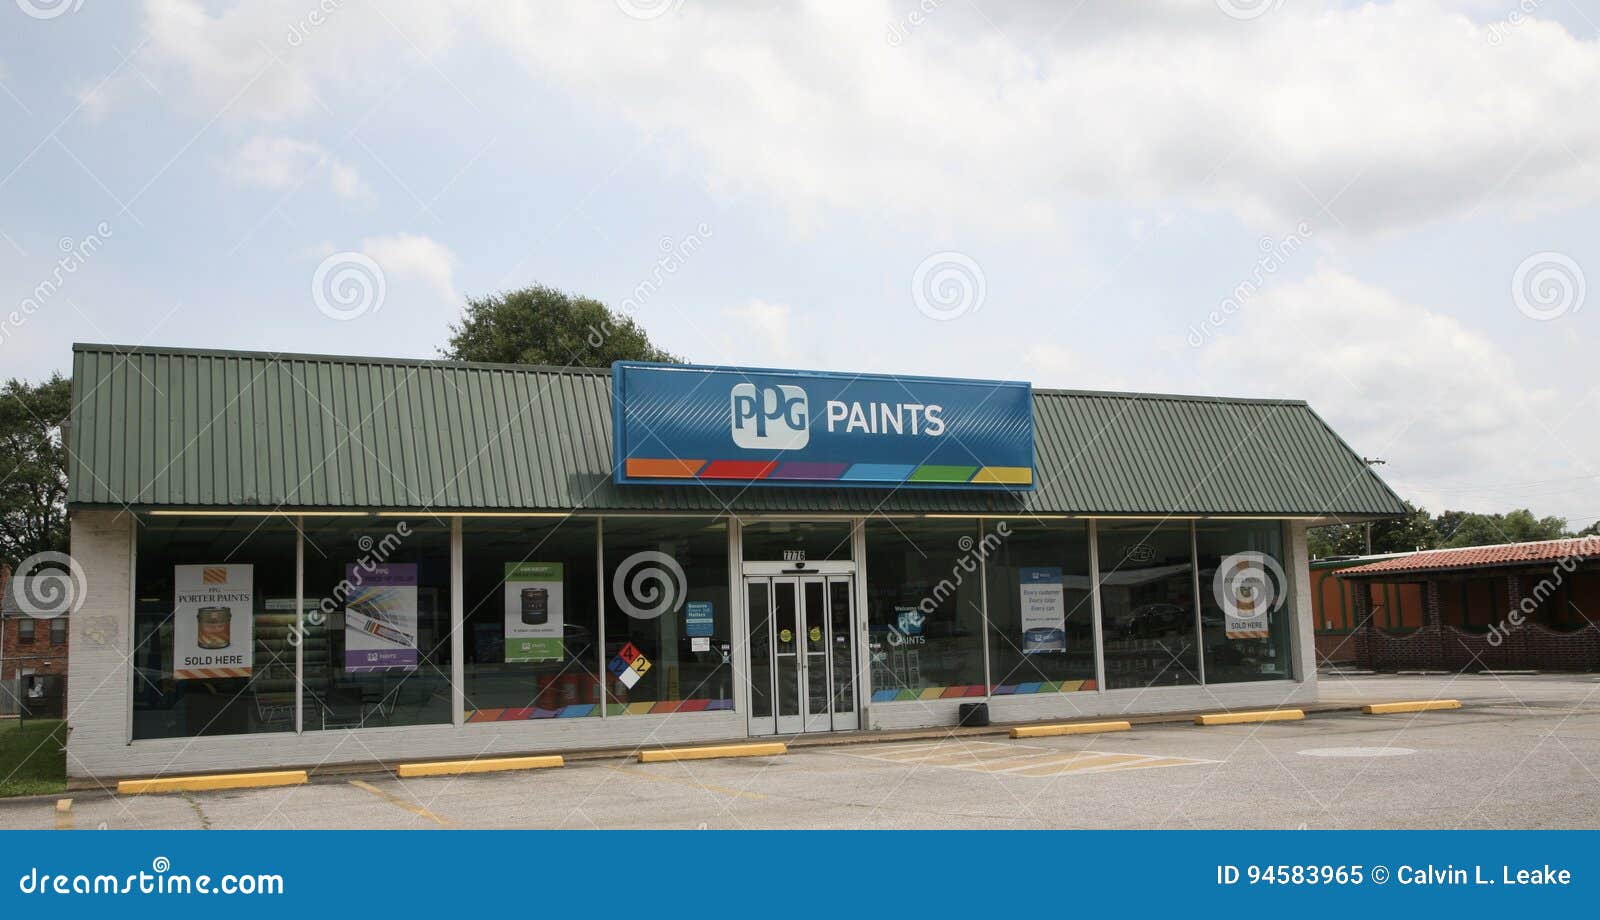 Ppg Paints Store Front Editorial Image Image Of